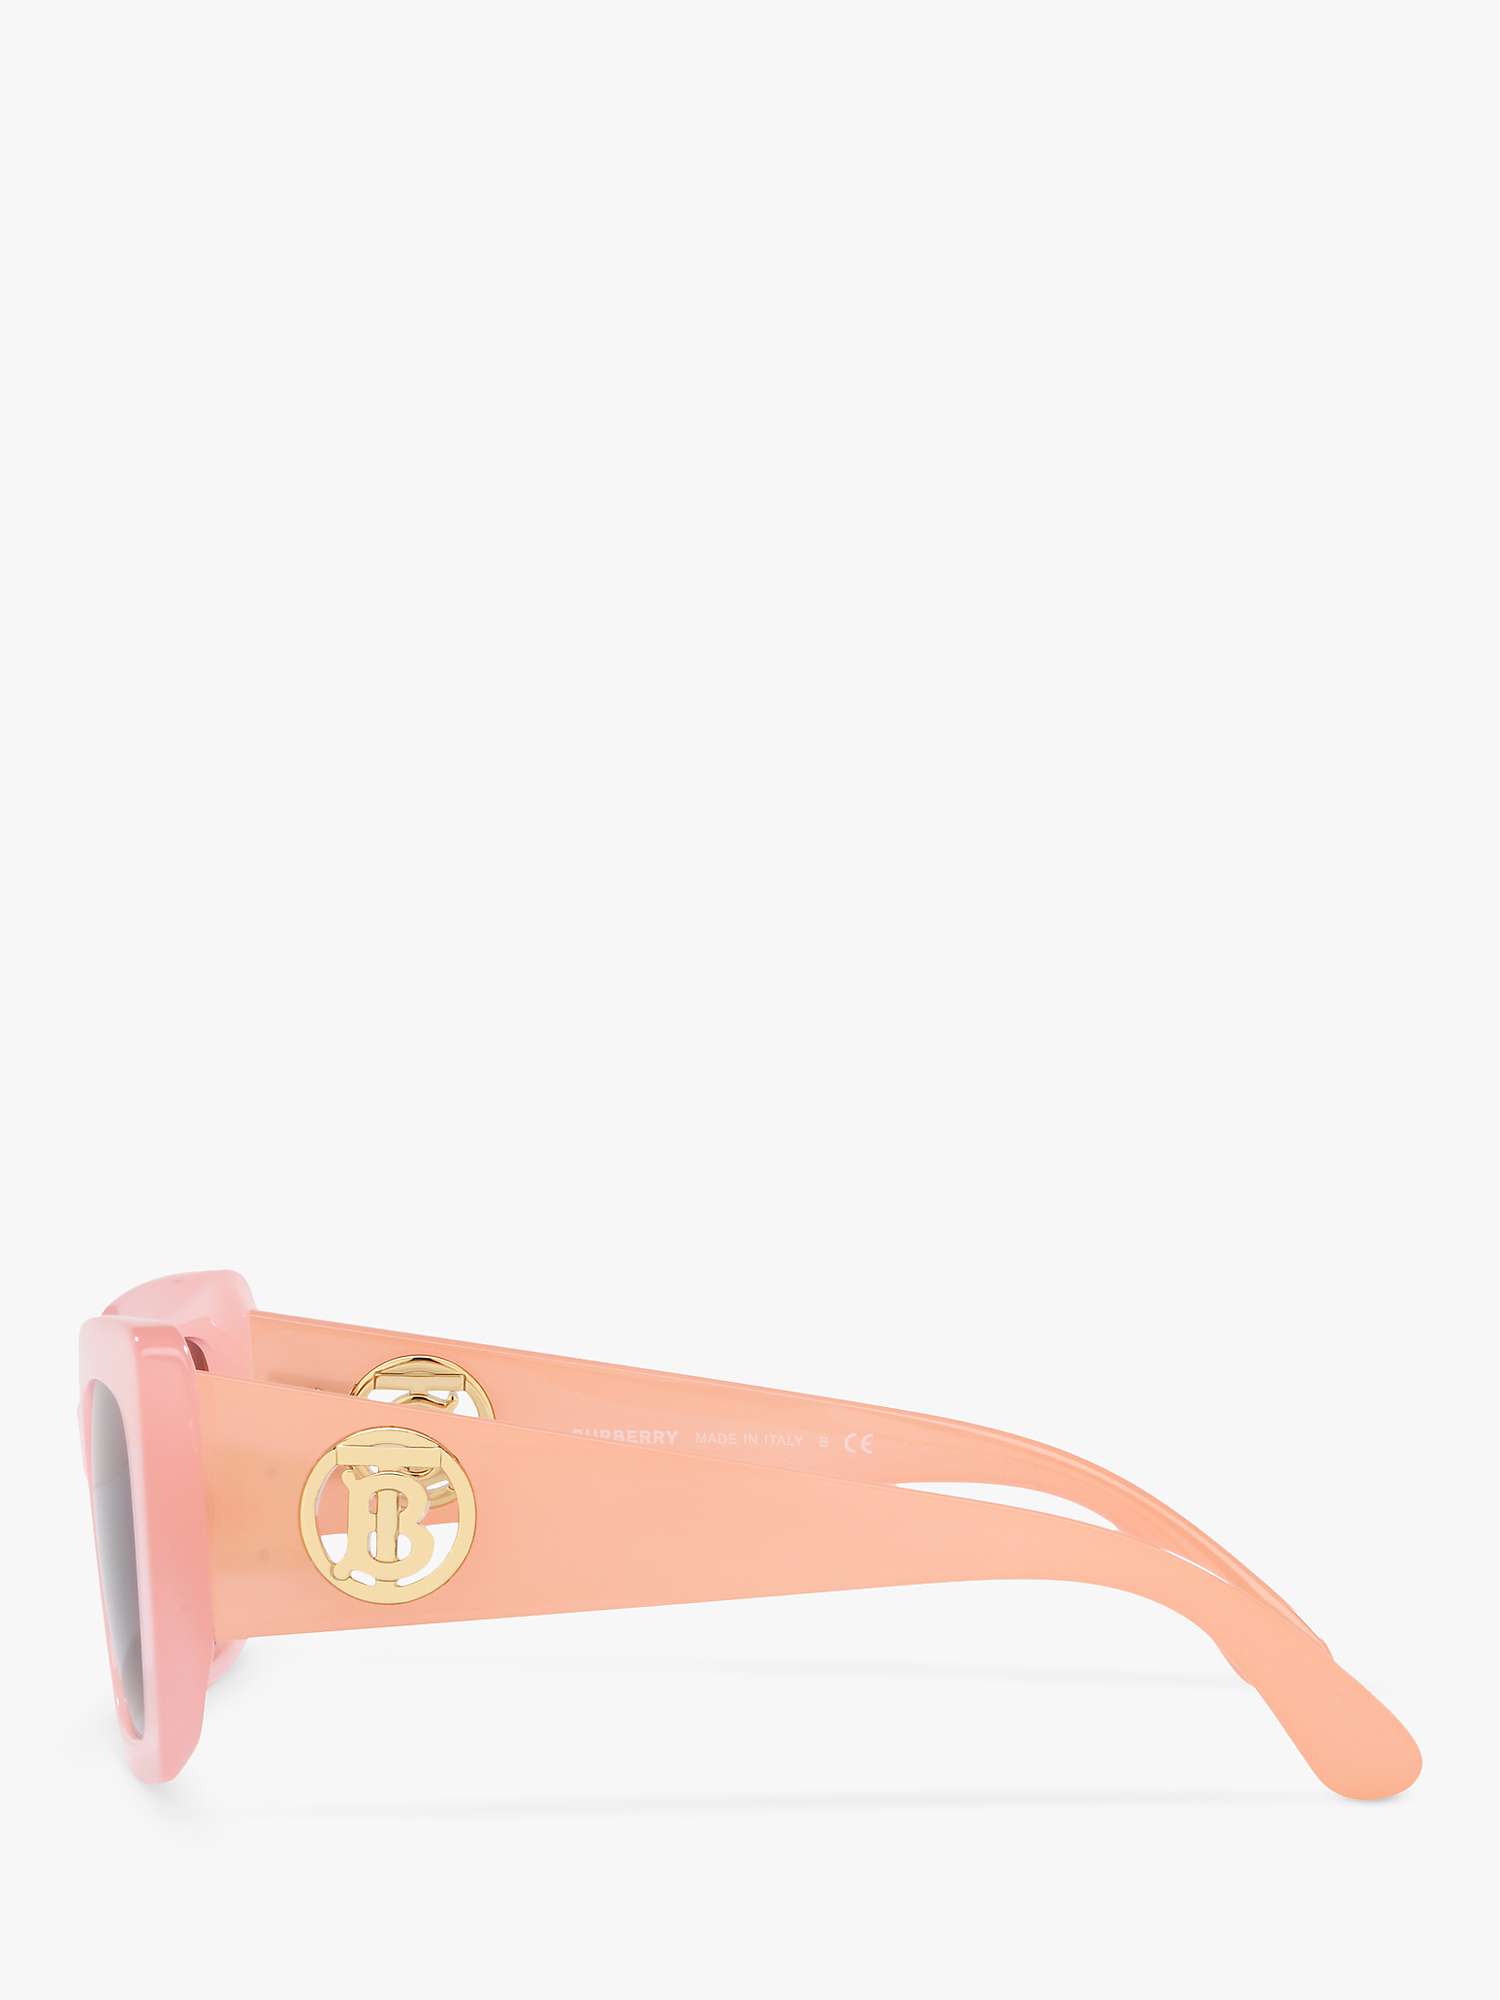 Buy Burberry BE4344 Women's Square Sunglasses, Pink/Brown Gradient Online at johnlewis.com